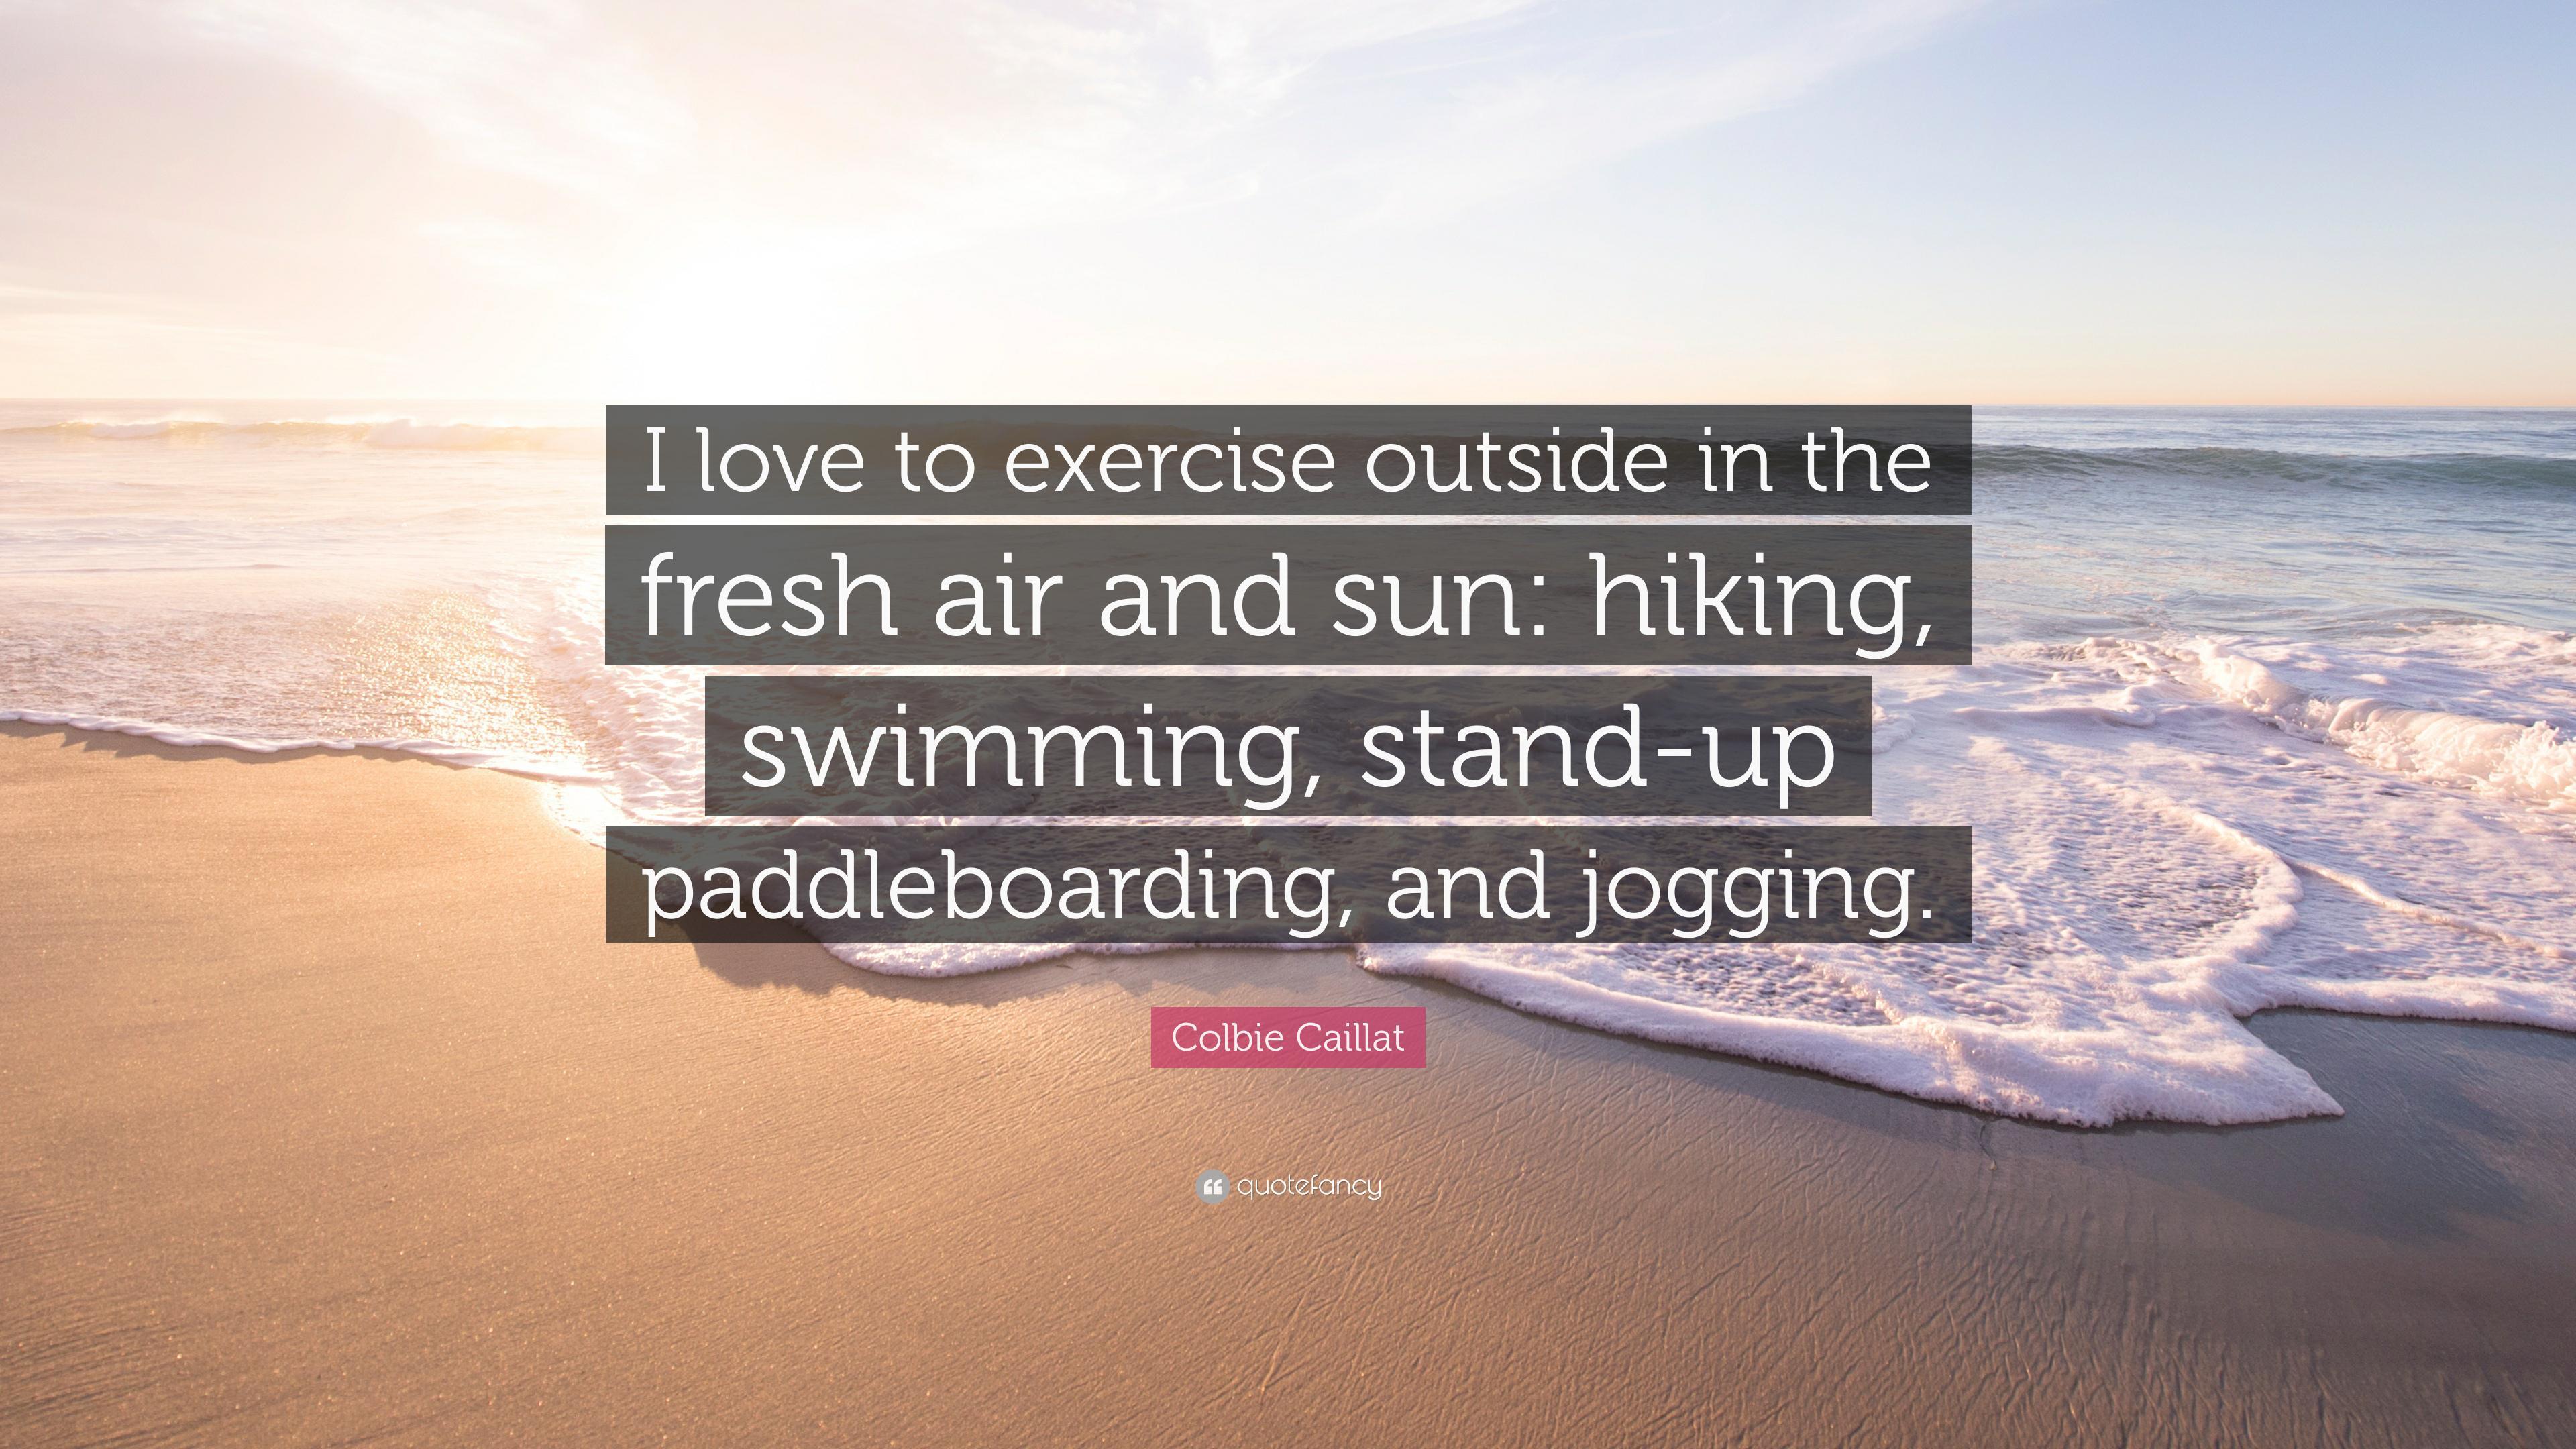 Colbie Caillat Quote: "I love to exercise outside in the fresh air 